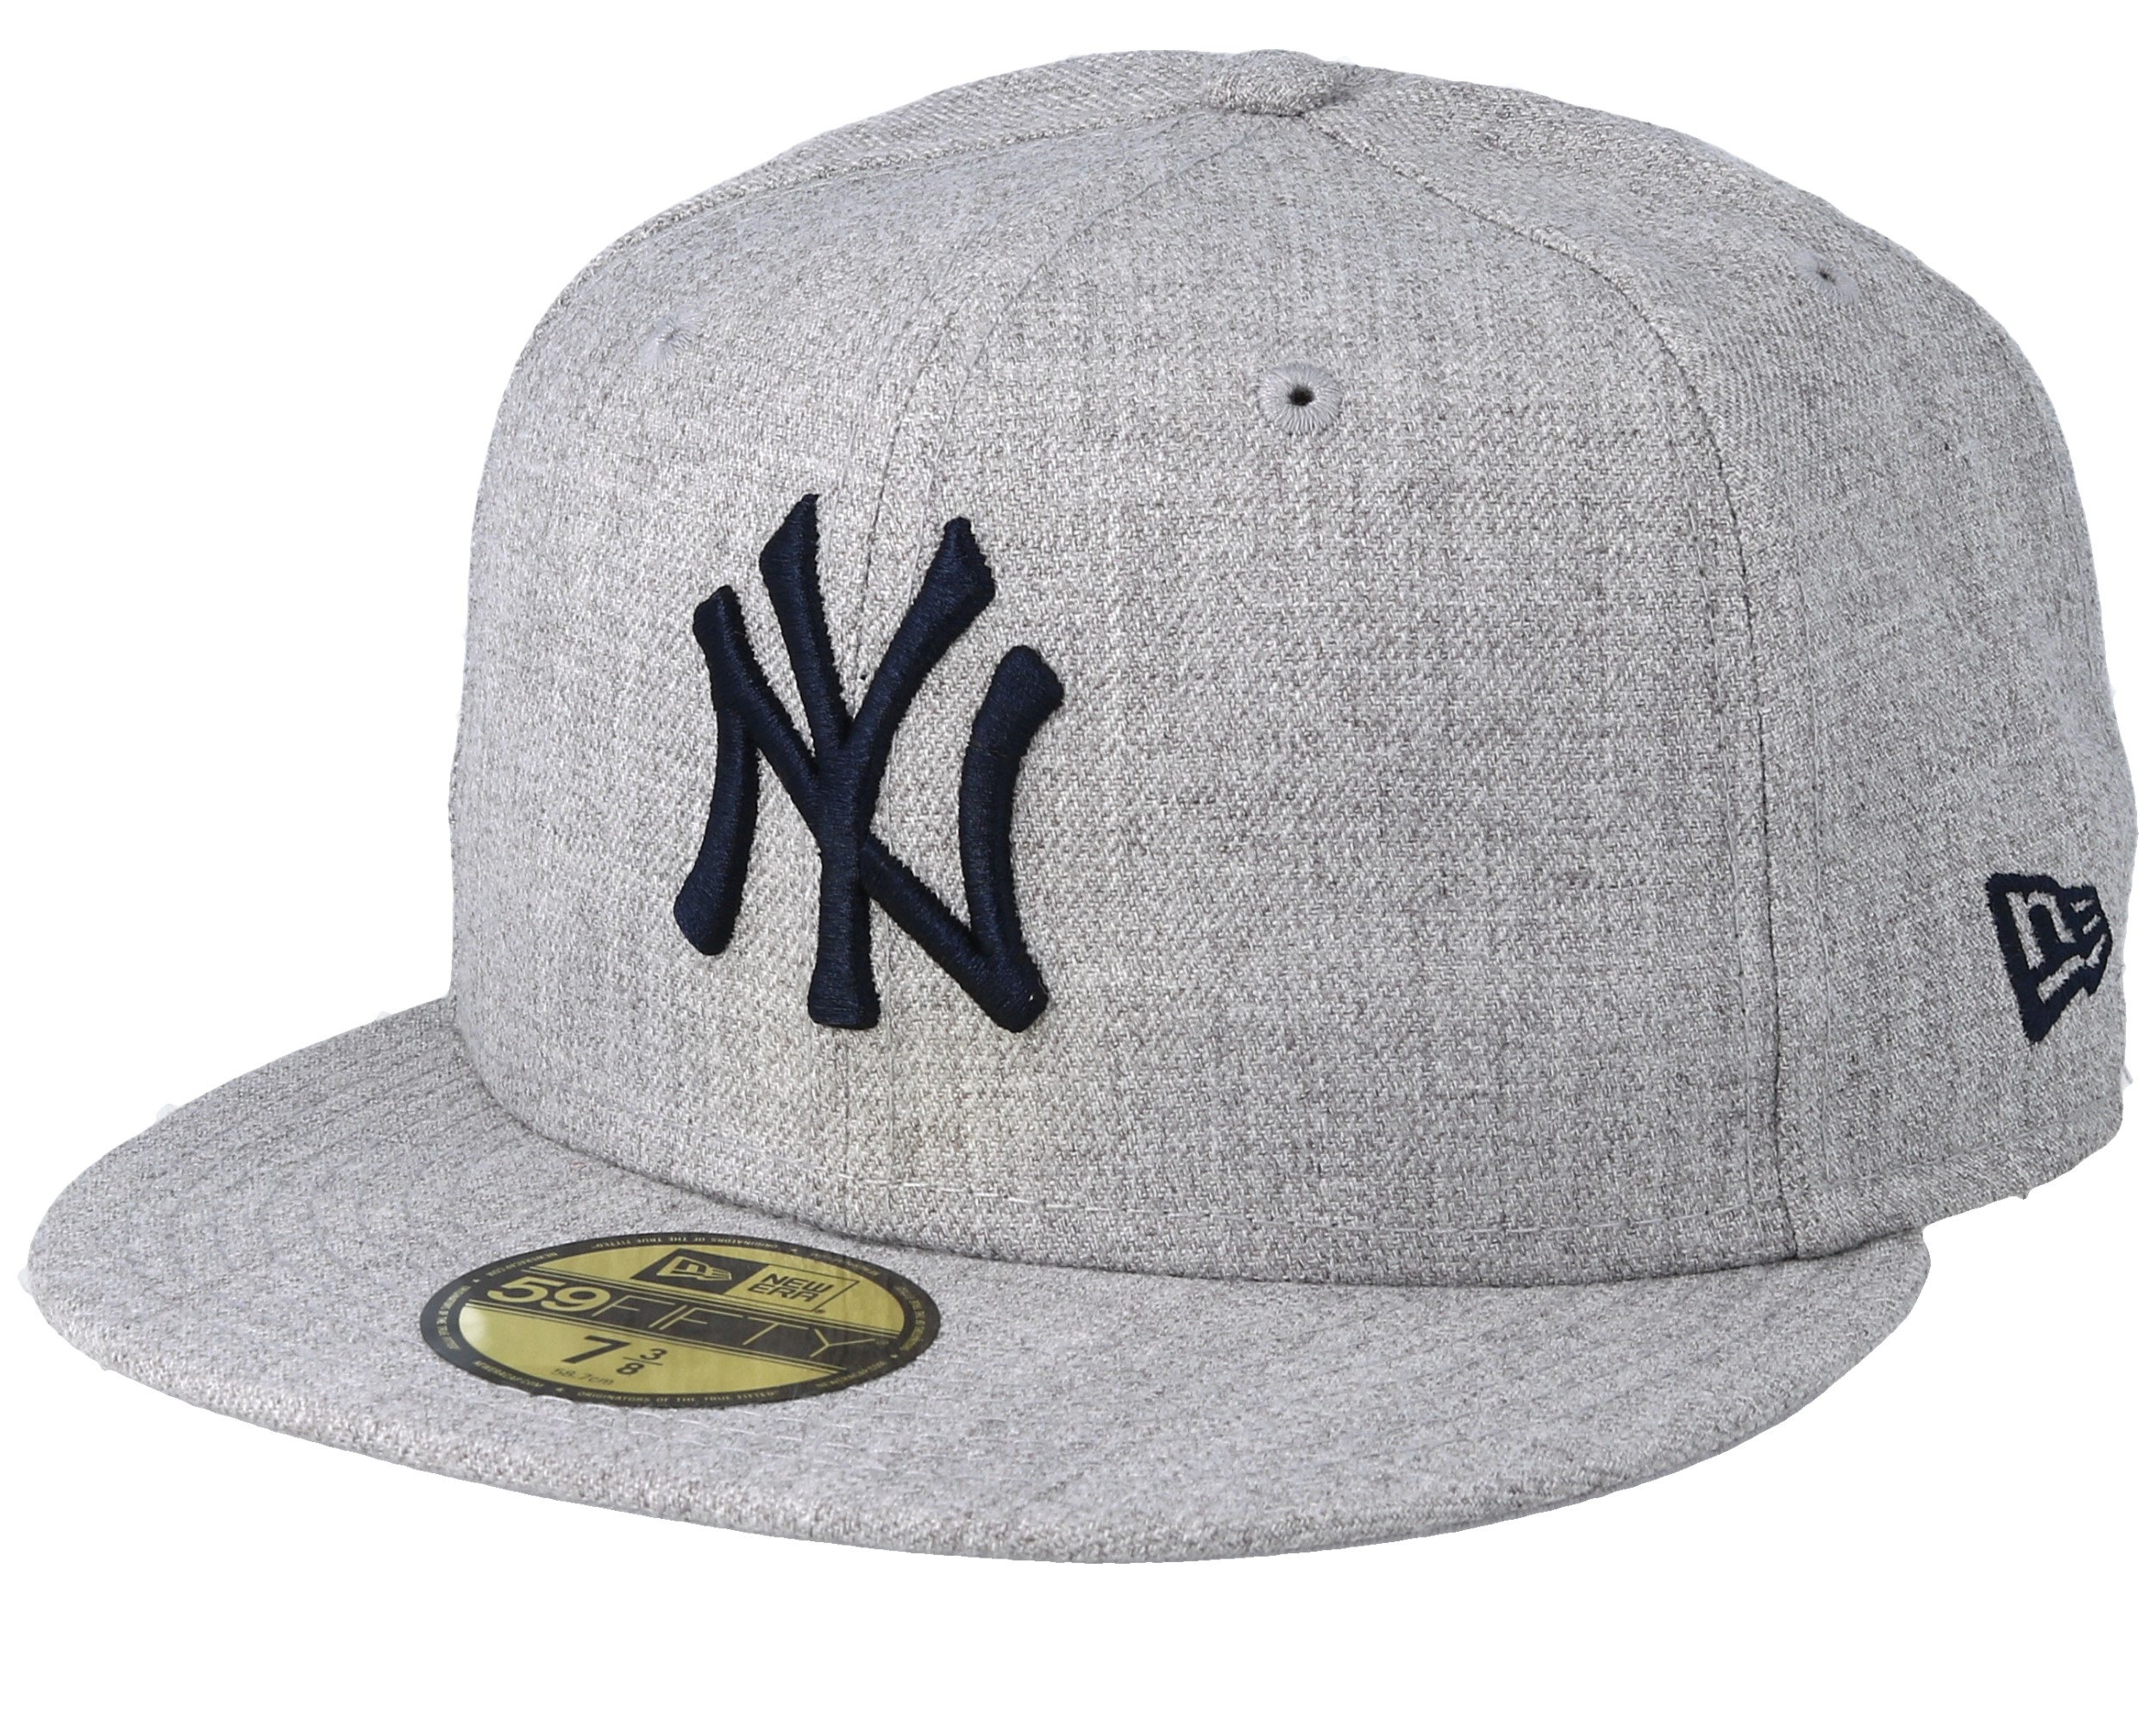 Heather 59Fifty York cap New Yankees Era Fitted Gray/Navy - New